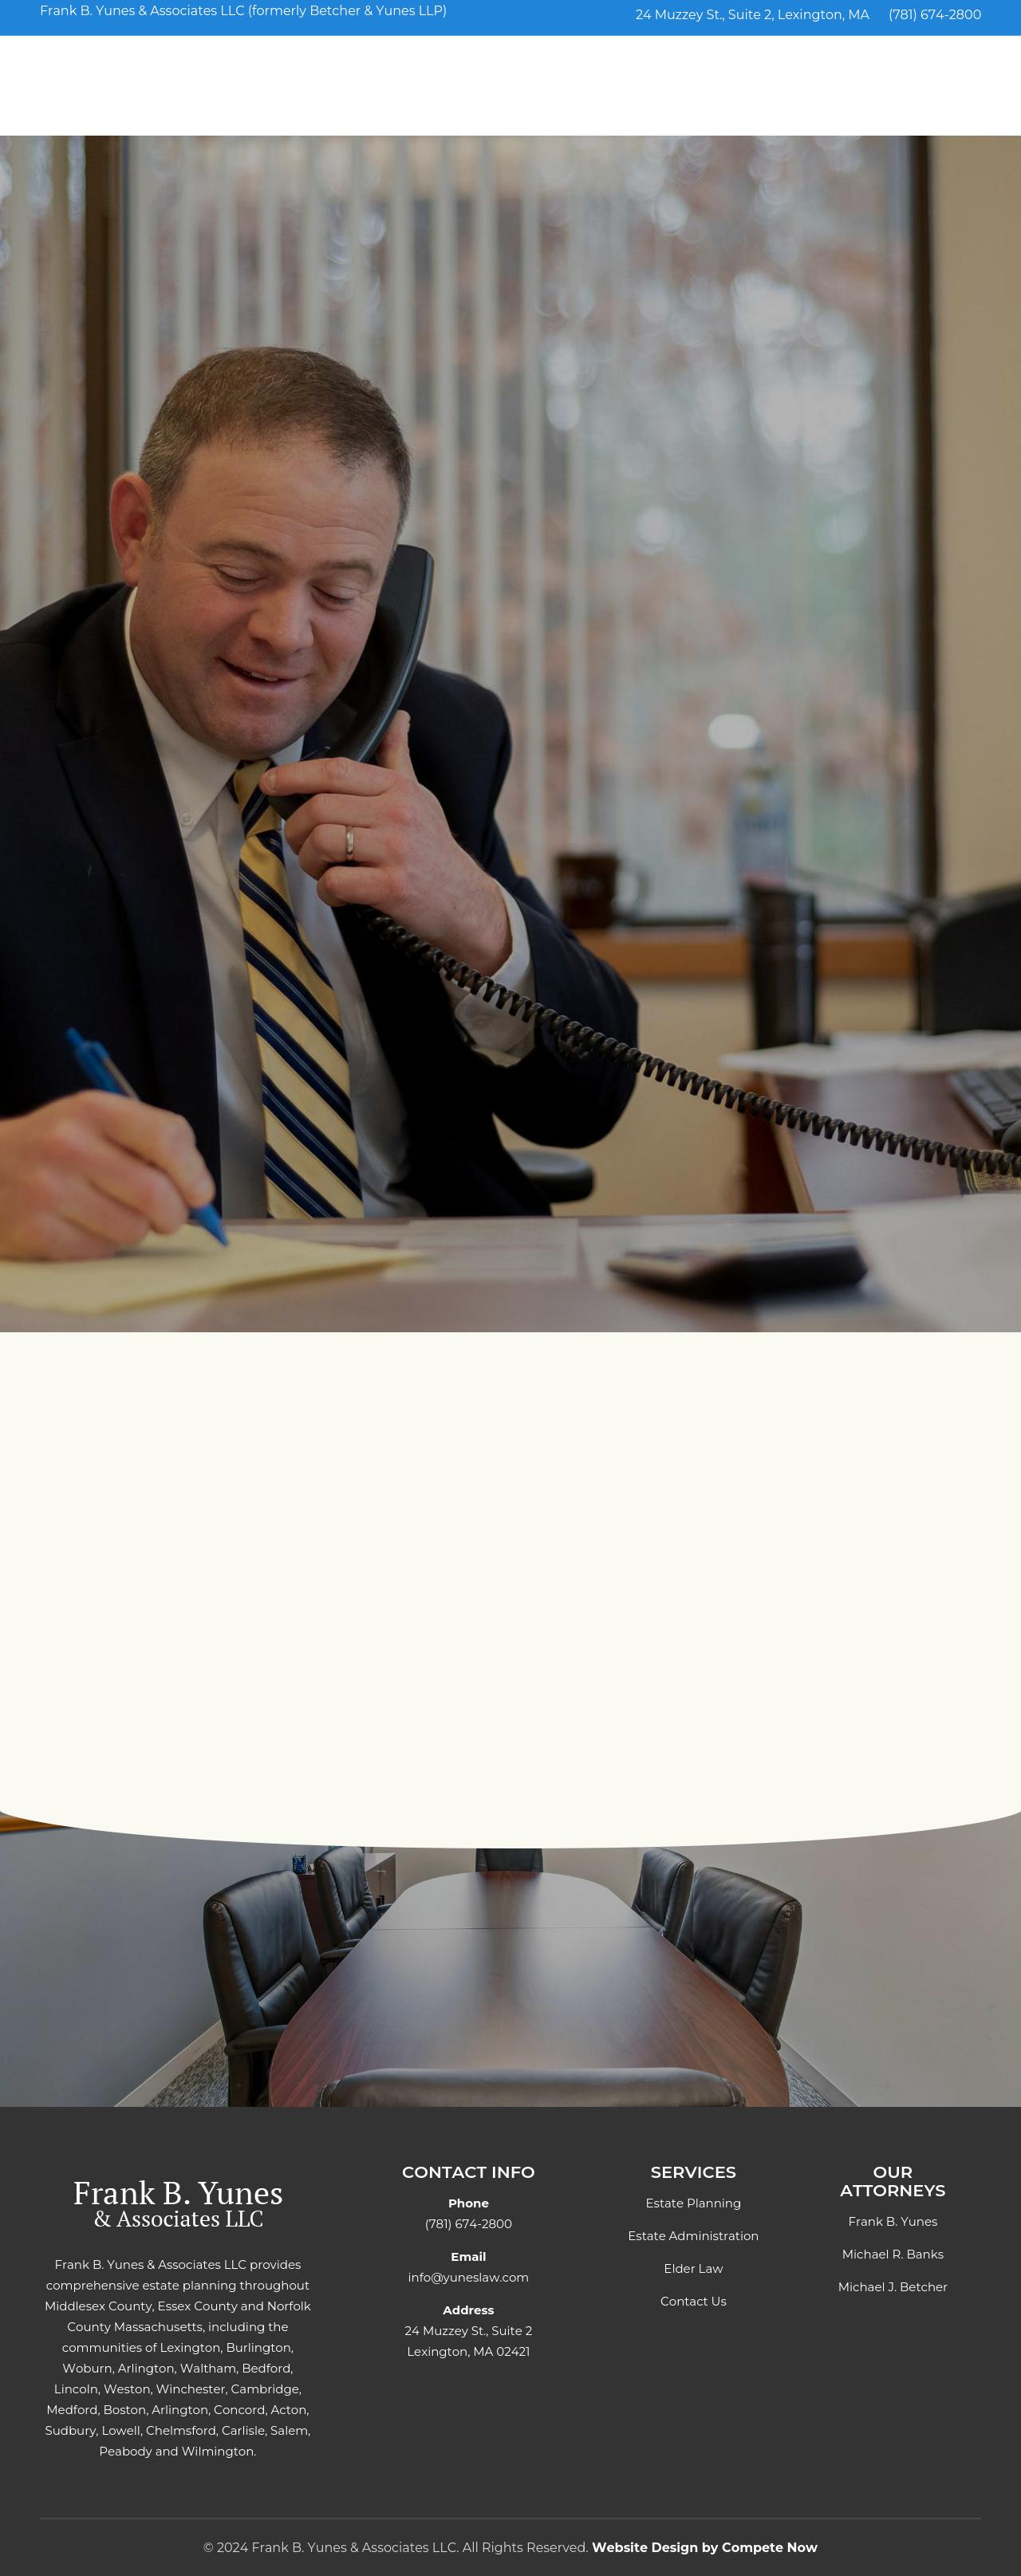 Betcher & Yunes LLP Attorneys at Law - Lexington MA Lawyers